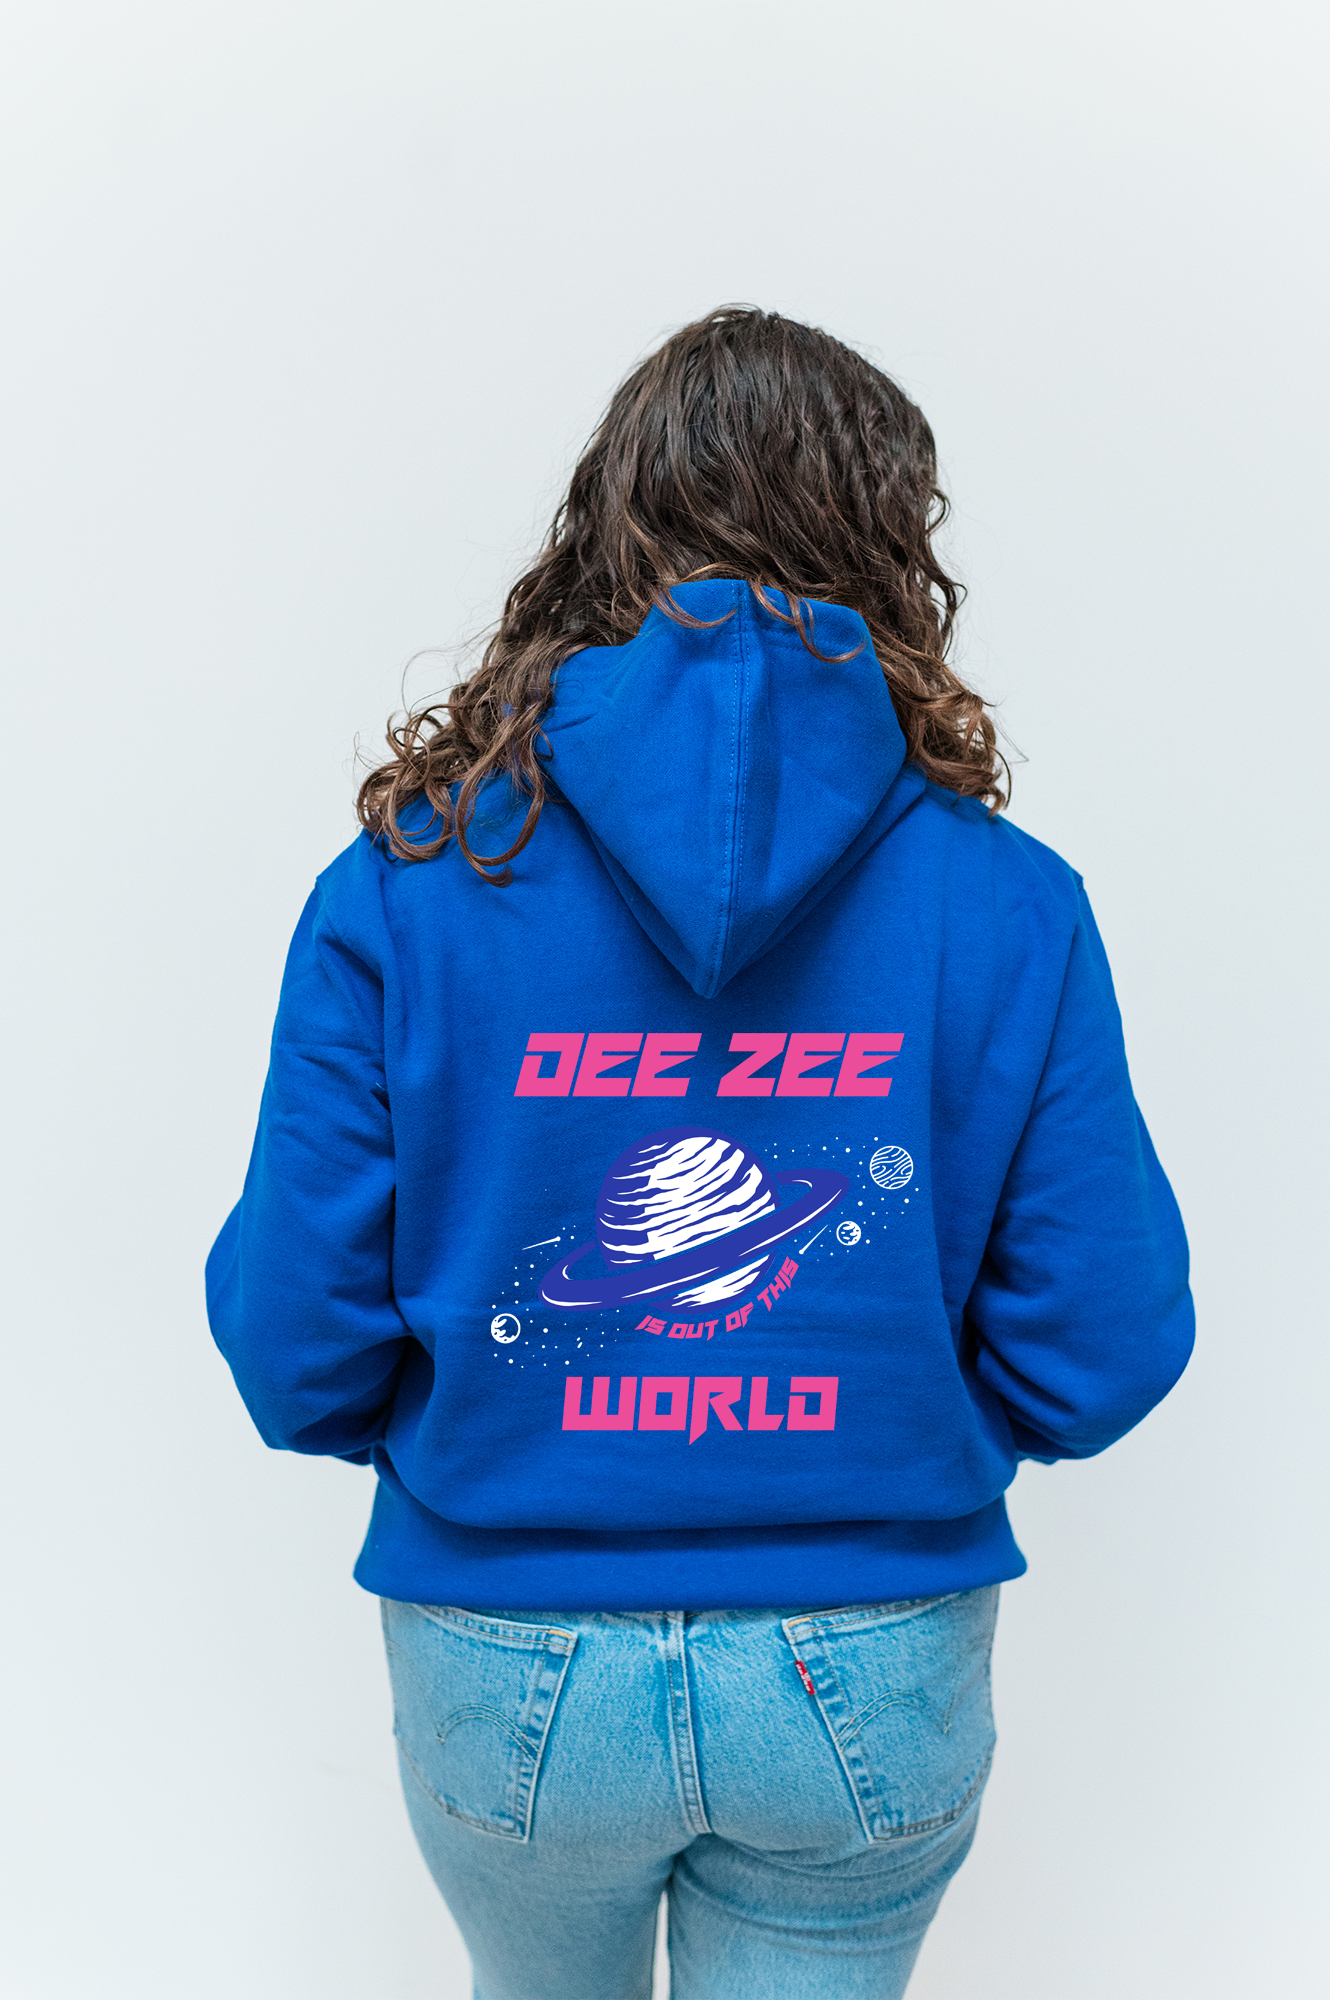 a woman wearing a blue hoodie with the words gee zee world on it